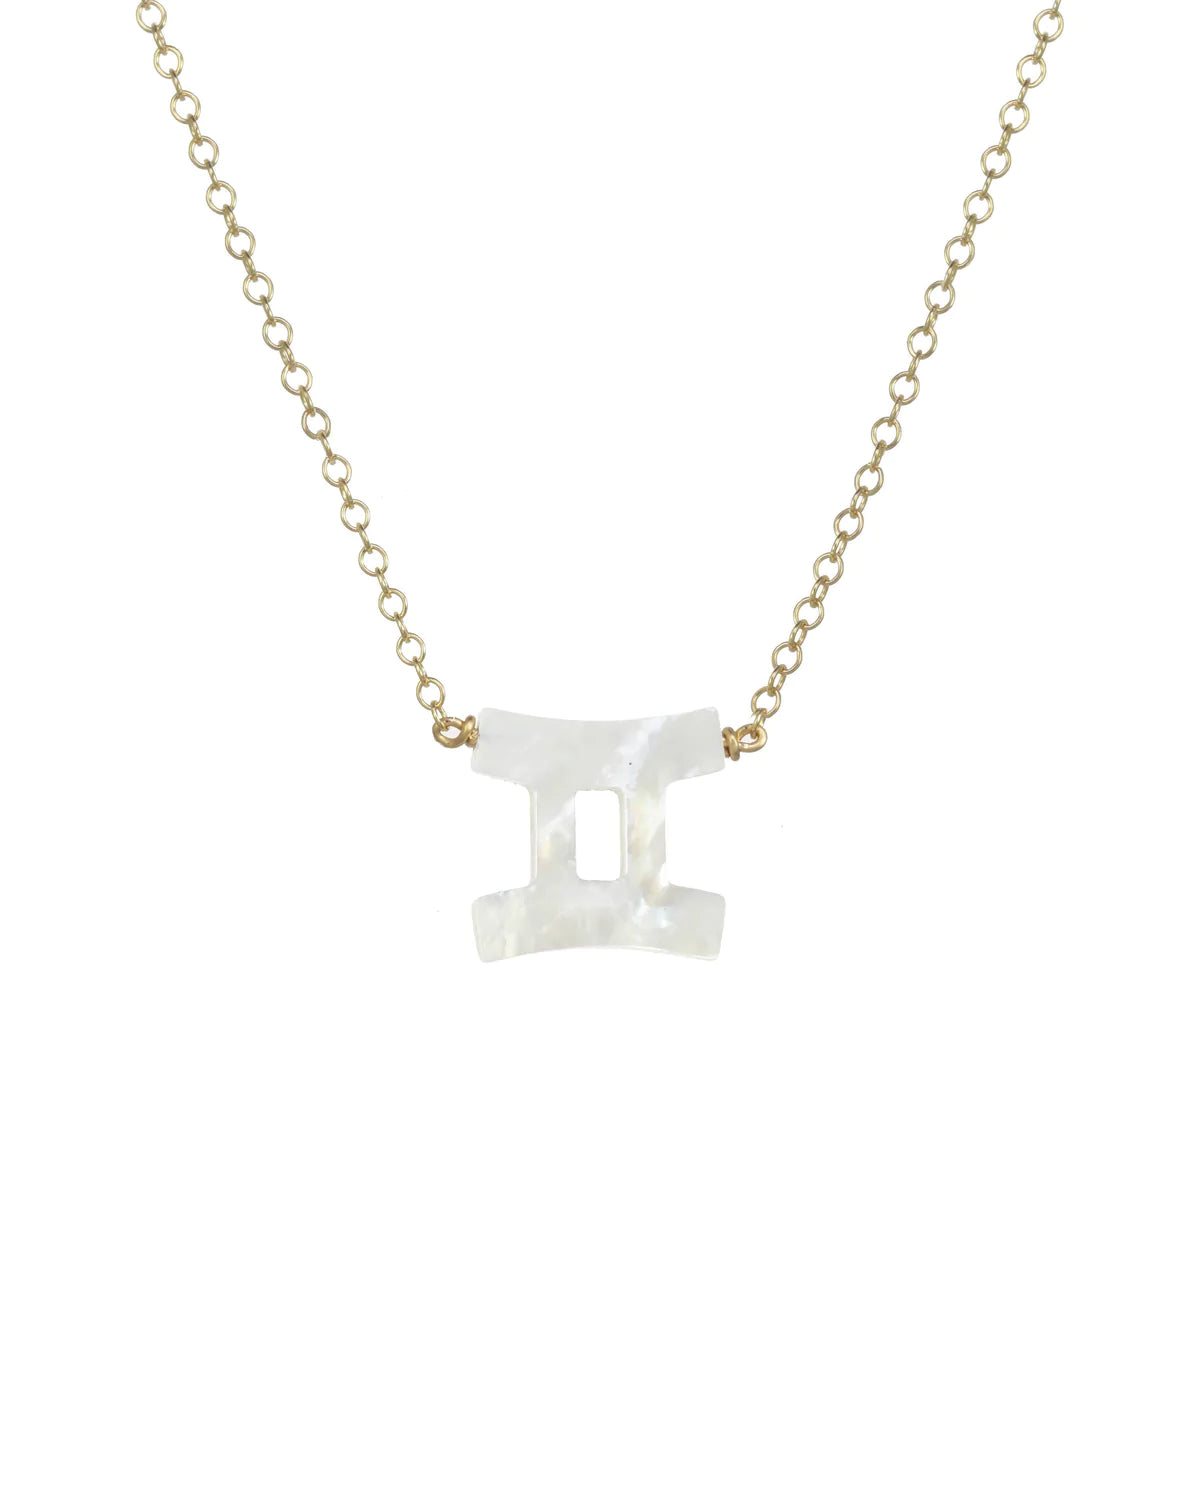 Gemini Necklace in MOP/Gold